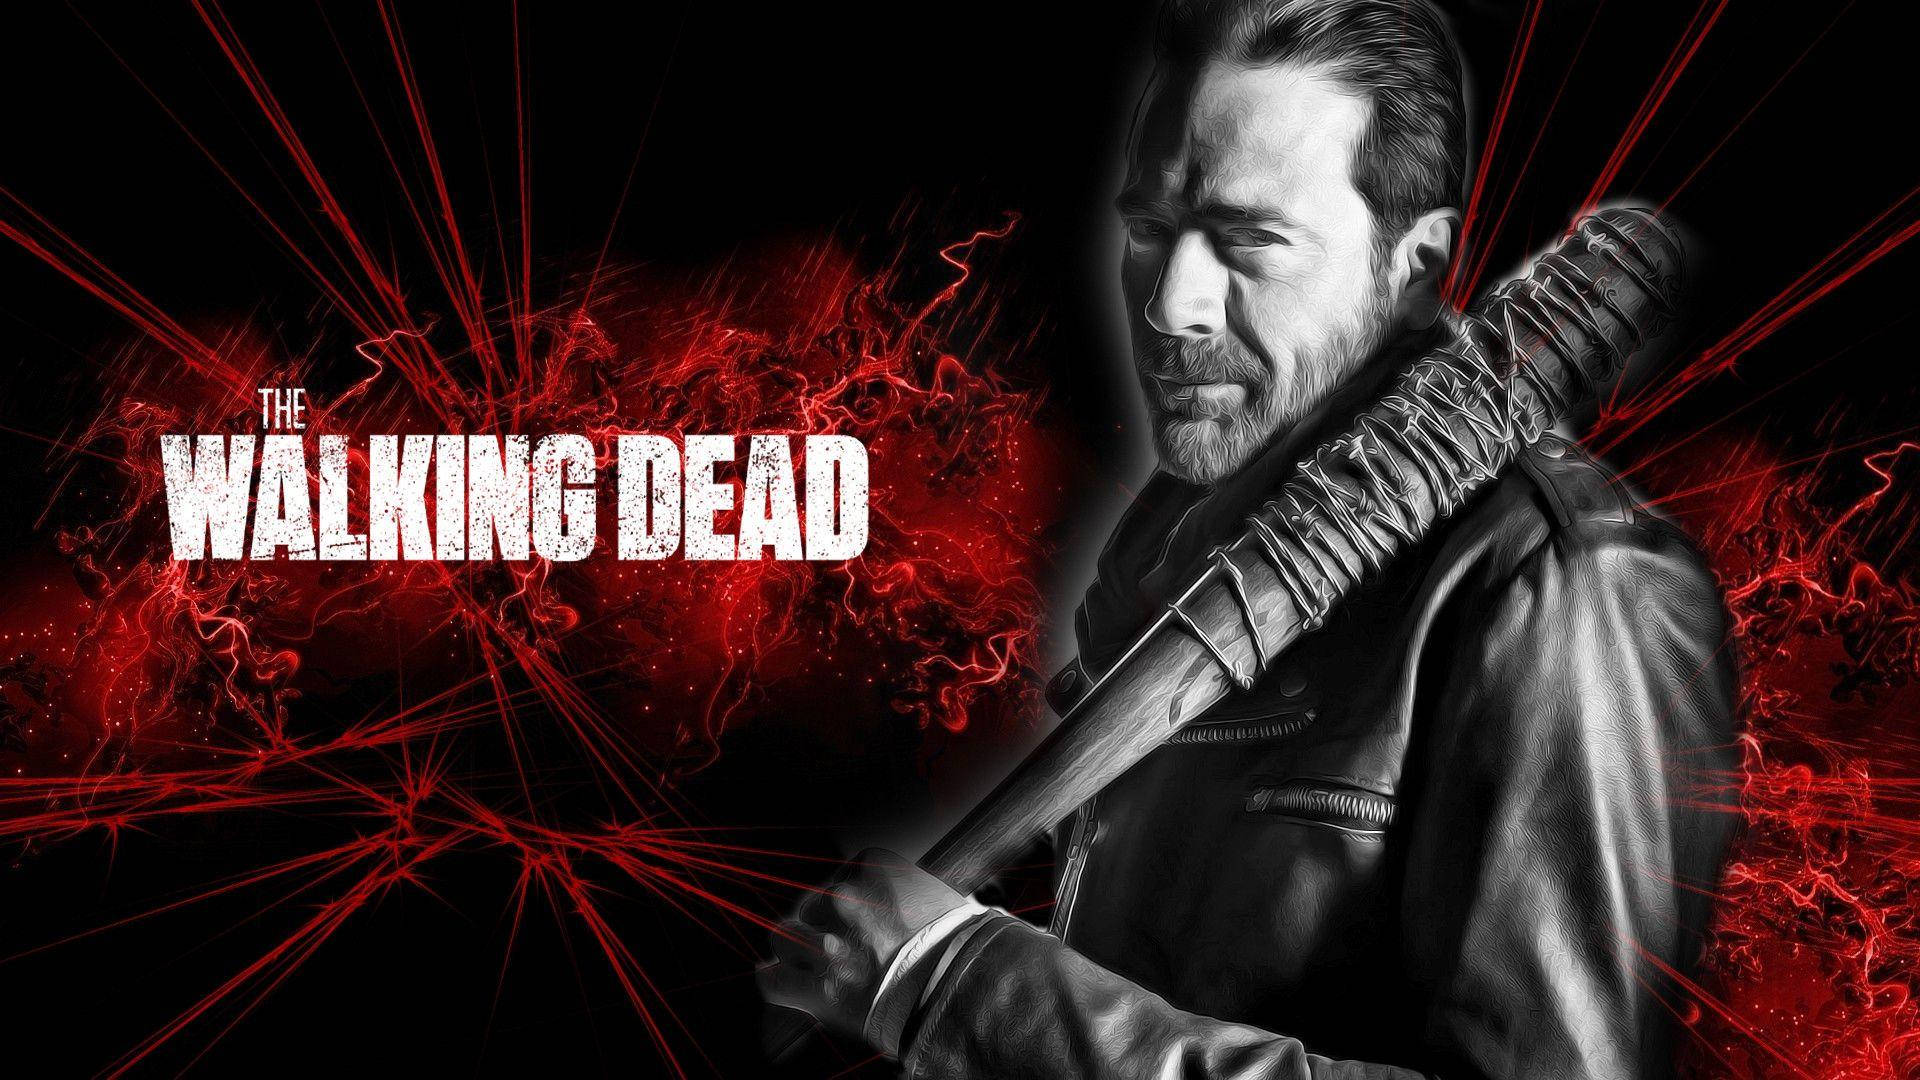 Negan With Red And Black Background Wallpaper